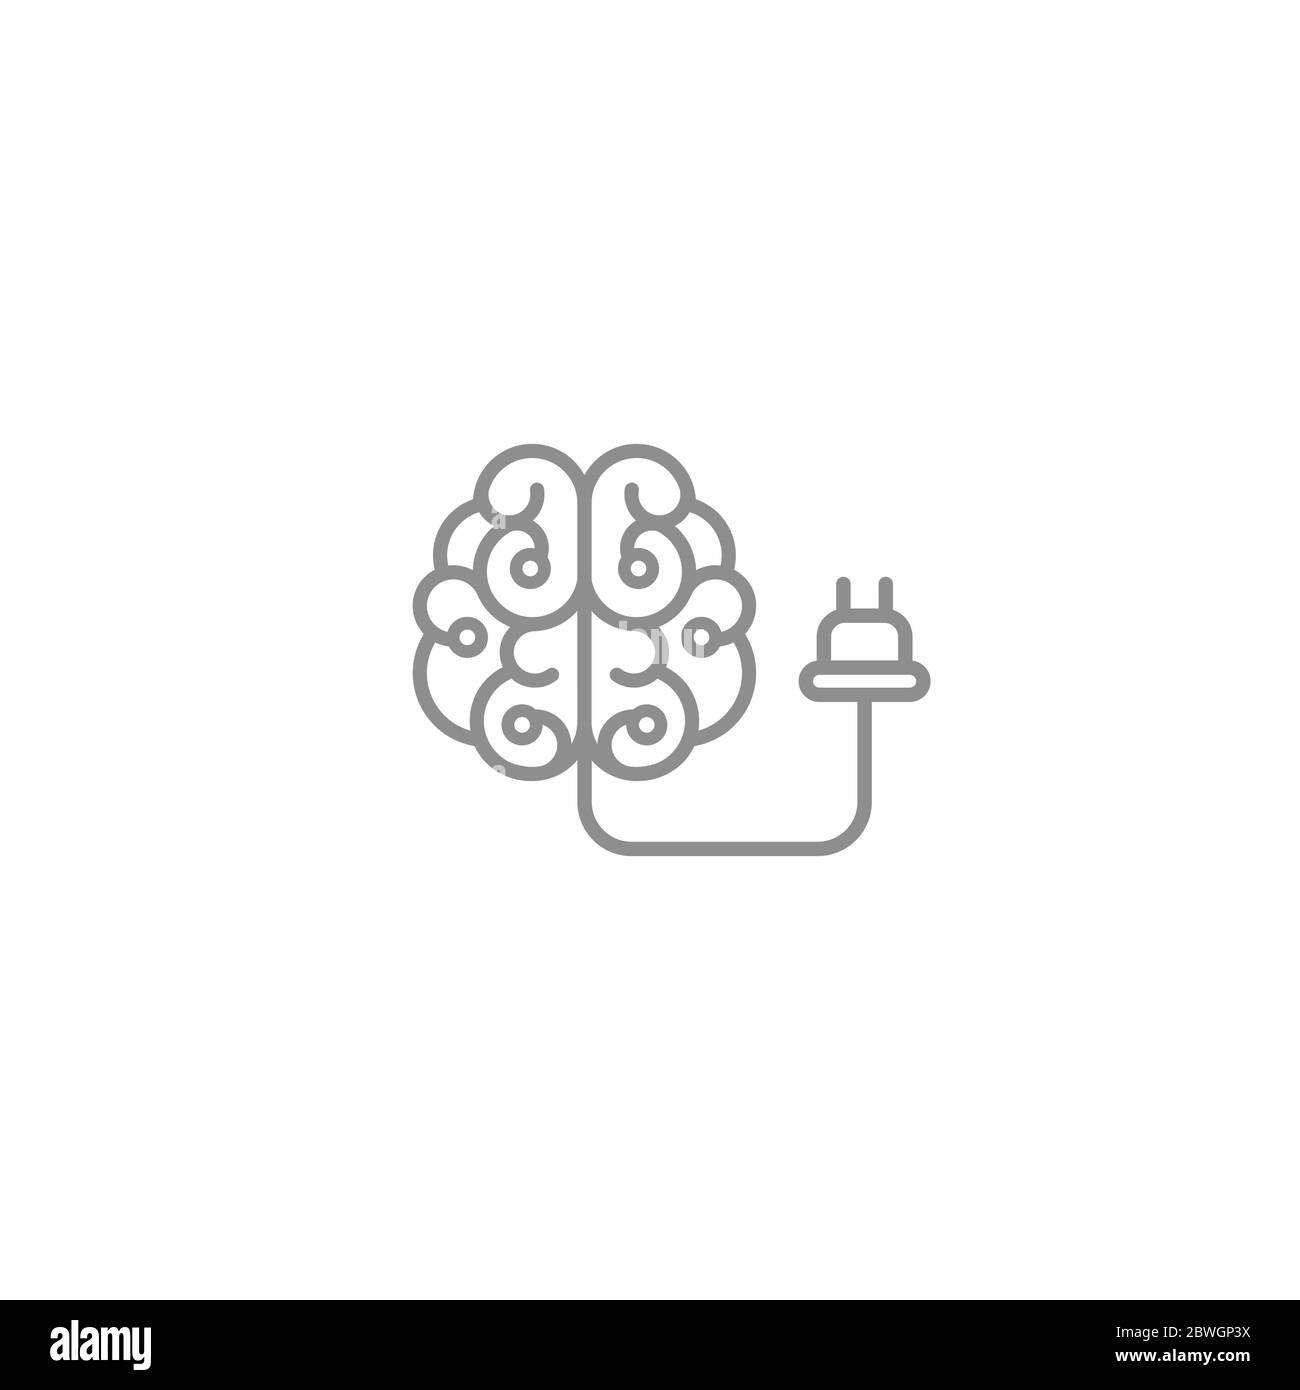 brain and electrical plug. Inspiration charge flat icon. New business idea. smart, clever, creative symbol Vector illustration. Knowledge, solution, i Stock Vector